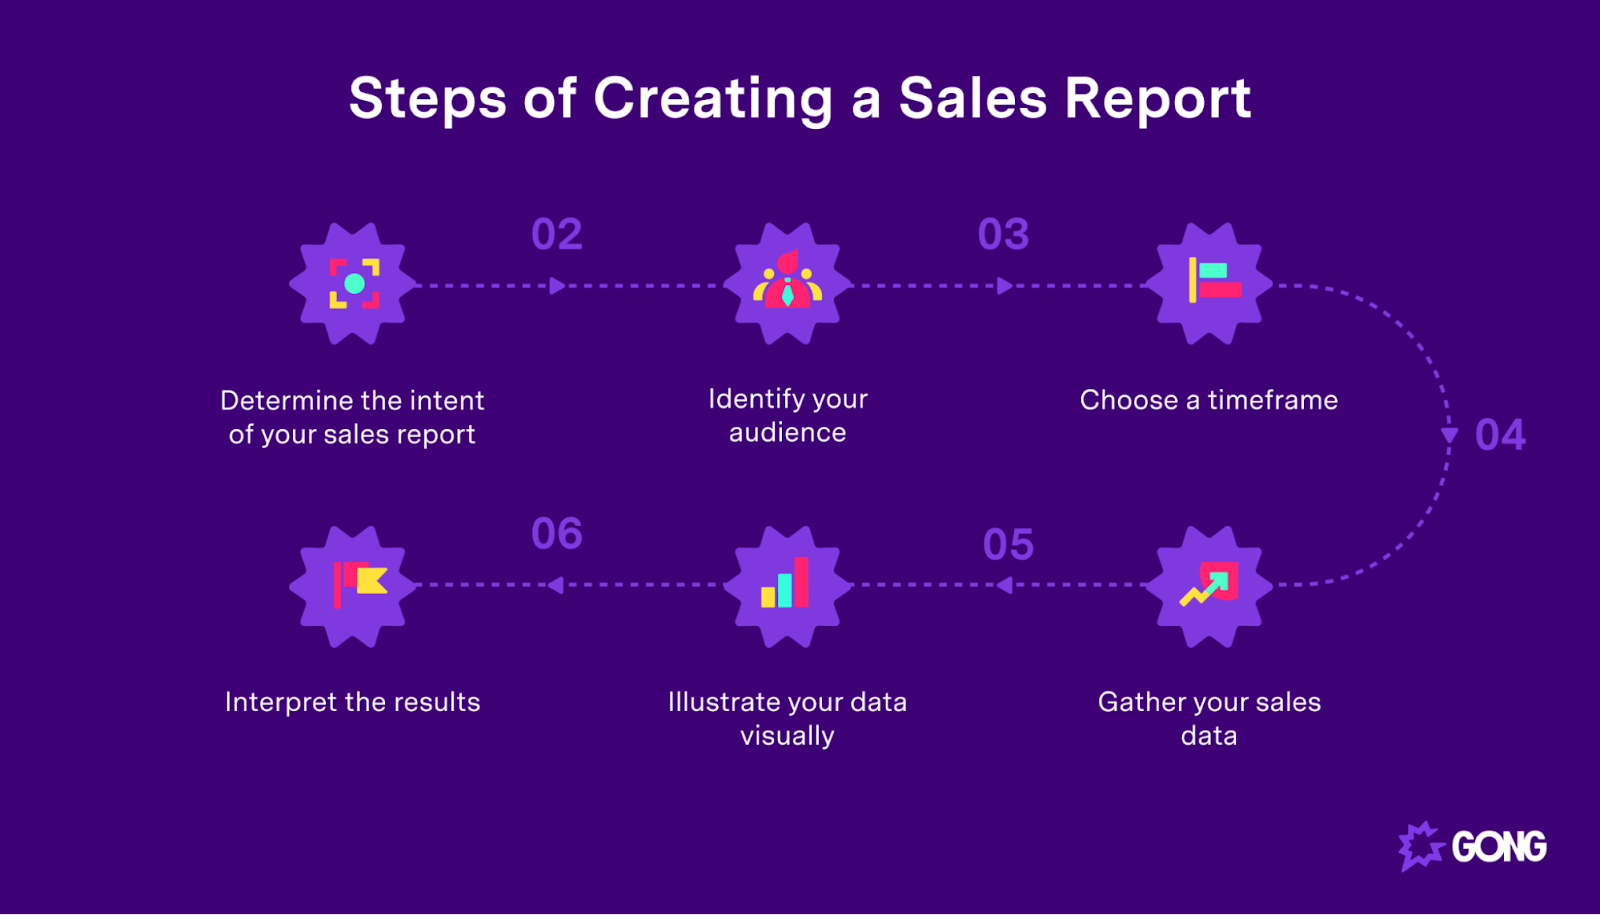 The six steps of creating a sales report.